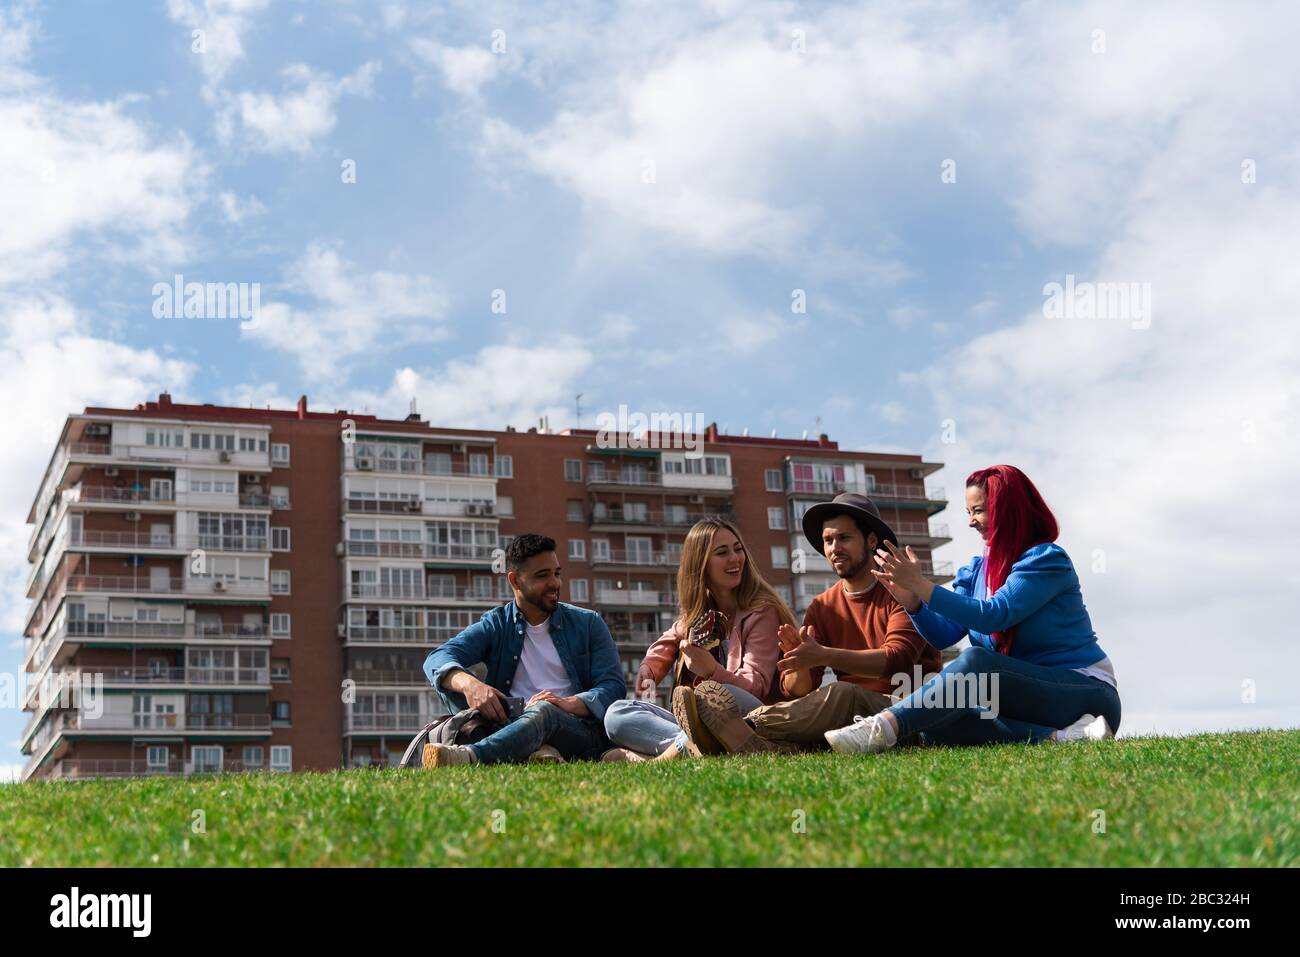 Two young Hispanic men enjoy music with a guitar next to two Caucasian girls in a city park, image includes space for text Stock Photo